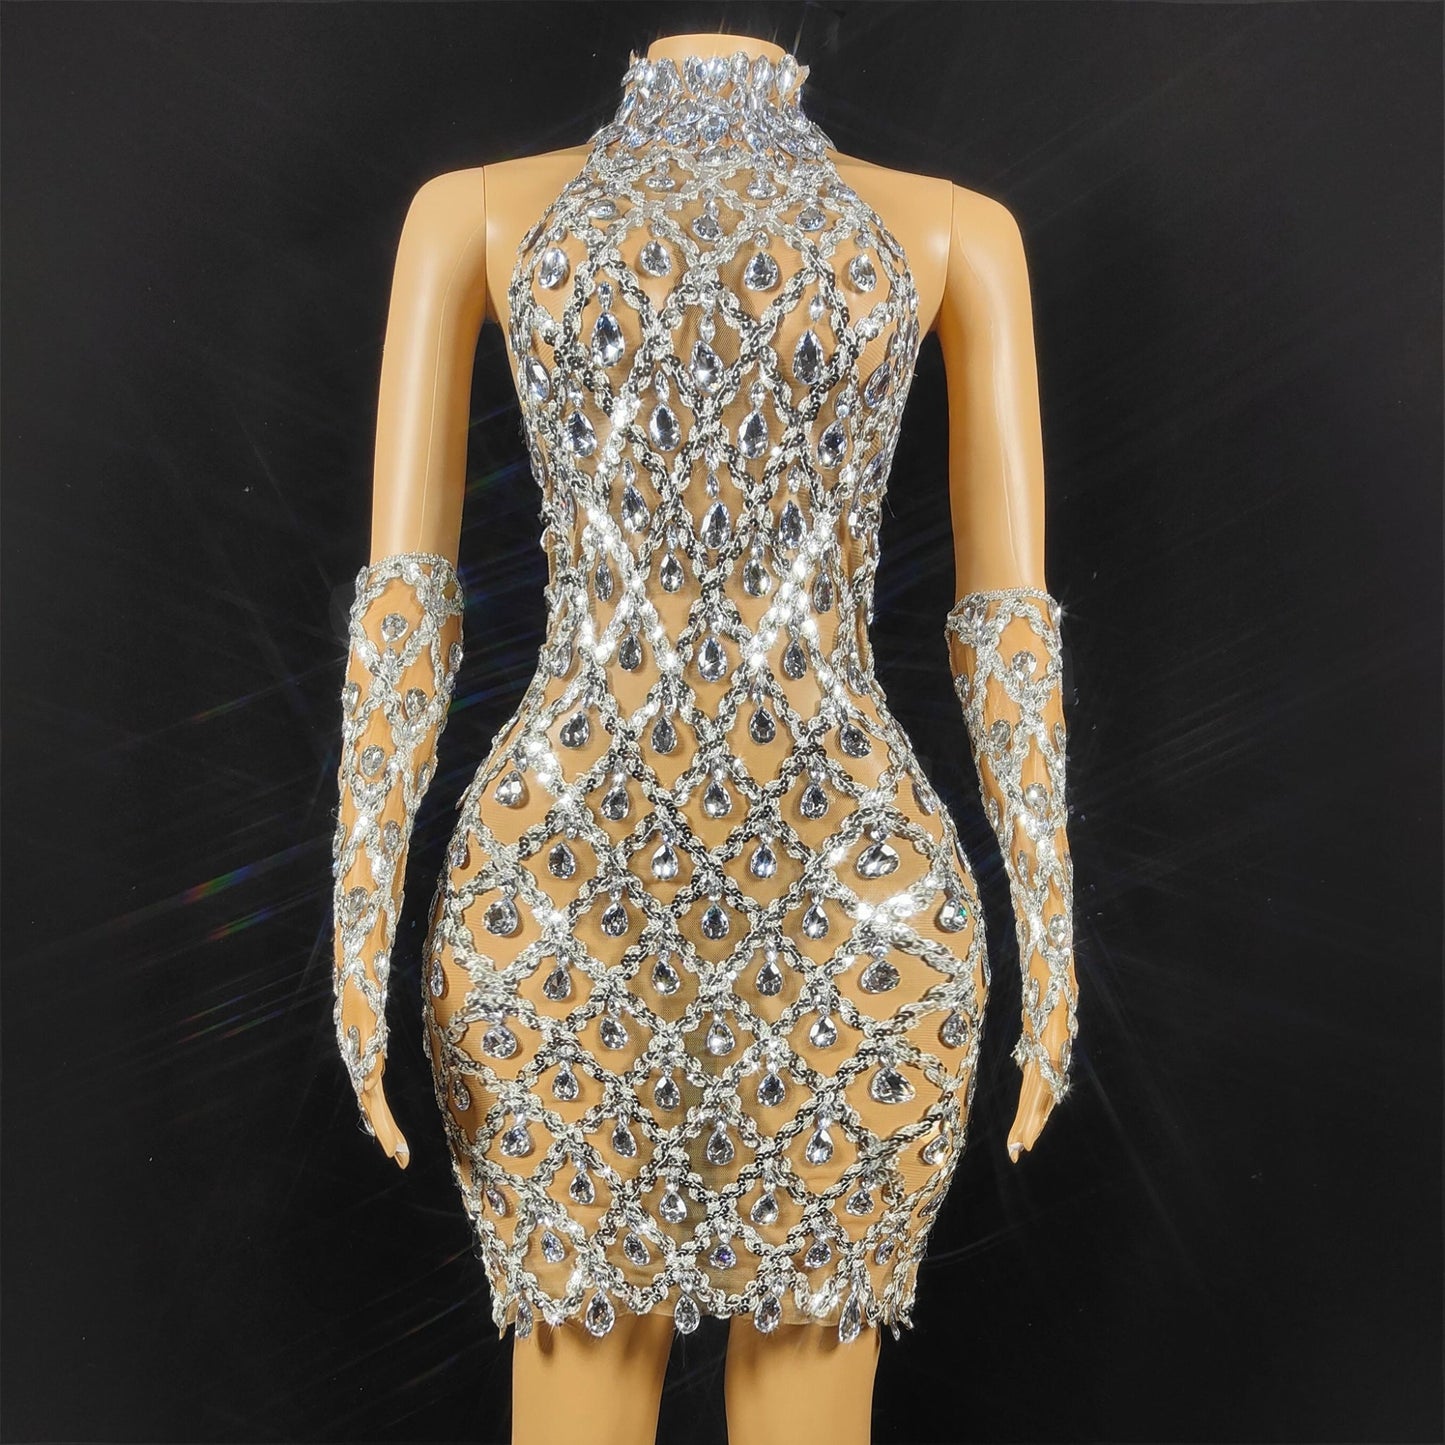 Chandelier Rhinestone and Sequin Mini Dress and Gloves